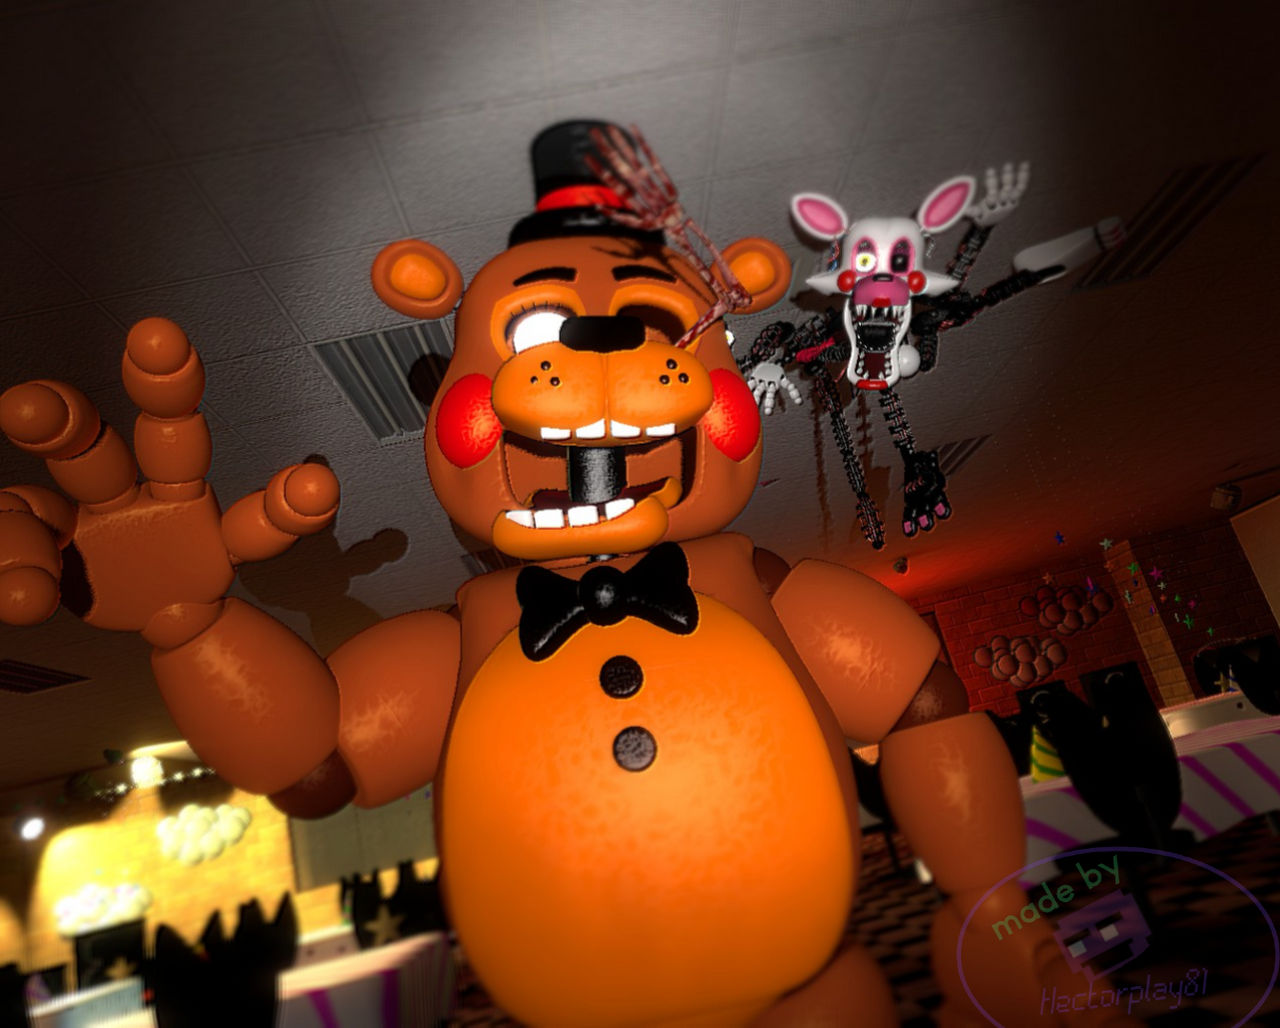 hectorplay81 on Game Jolt: Fixed Molten Freddy